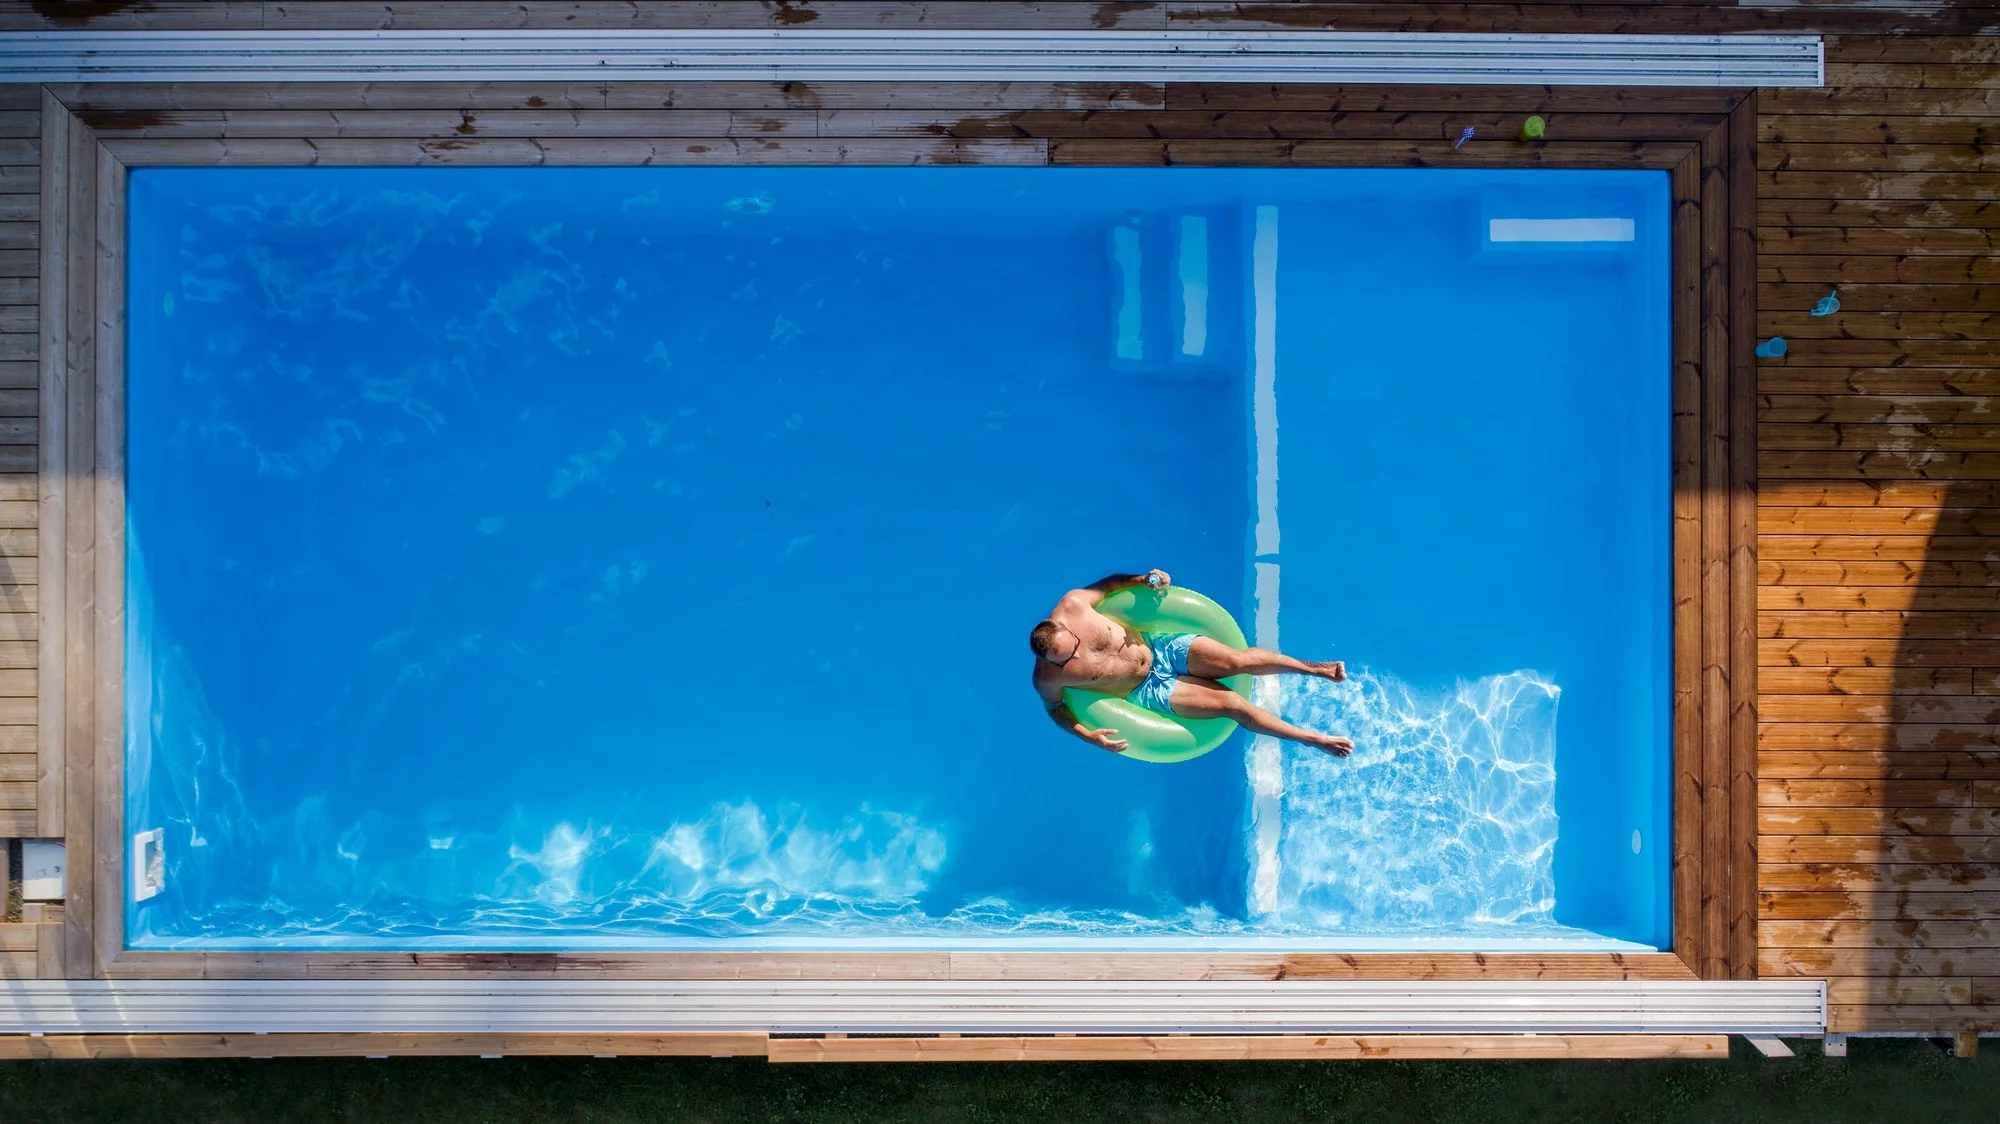 How Much Does A Pool Raise Your Home Insurance?